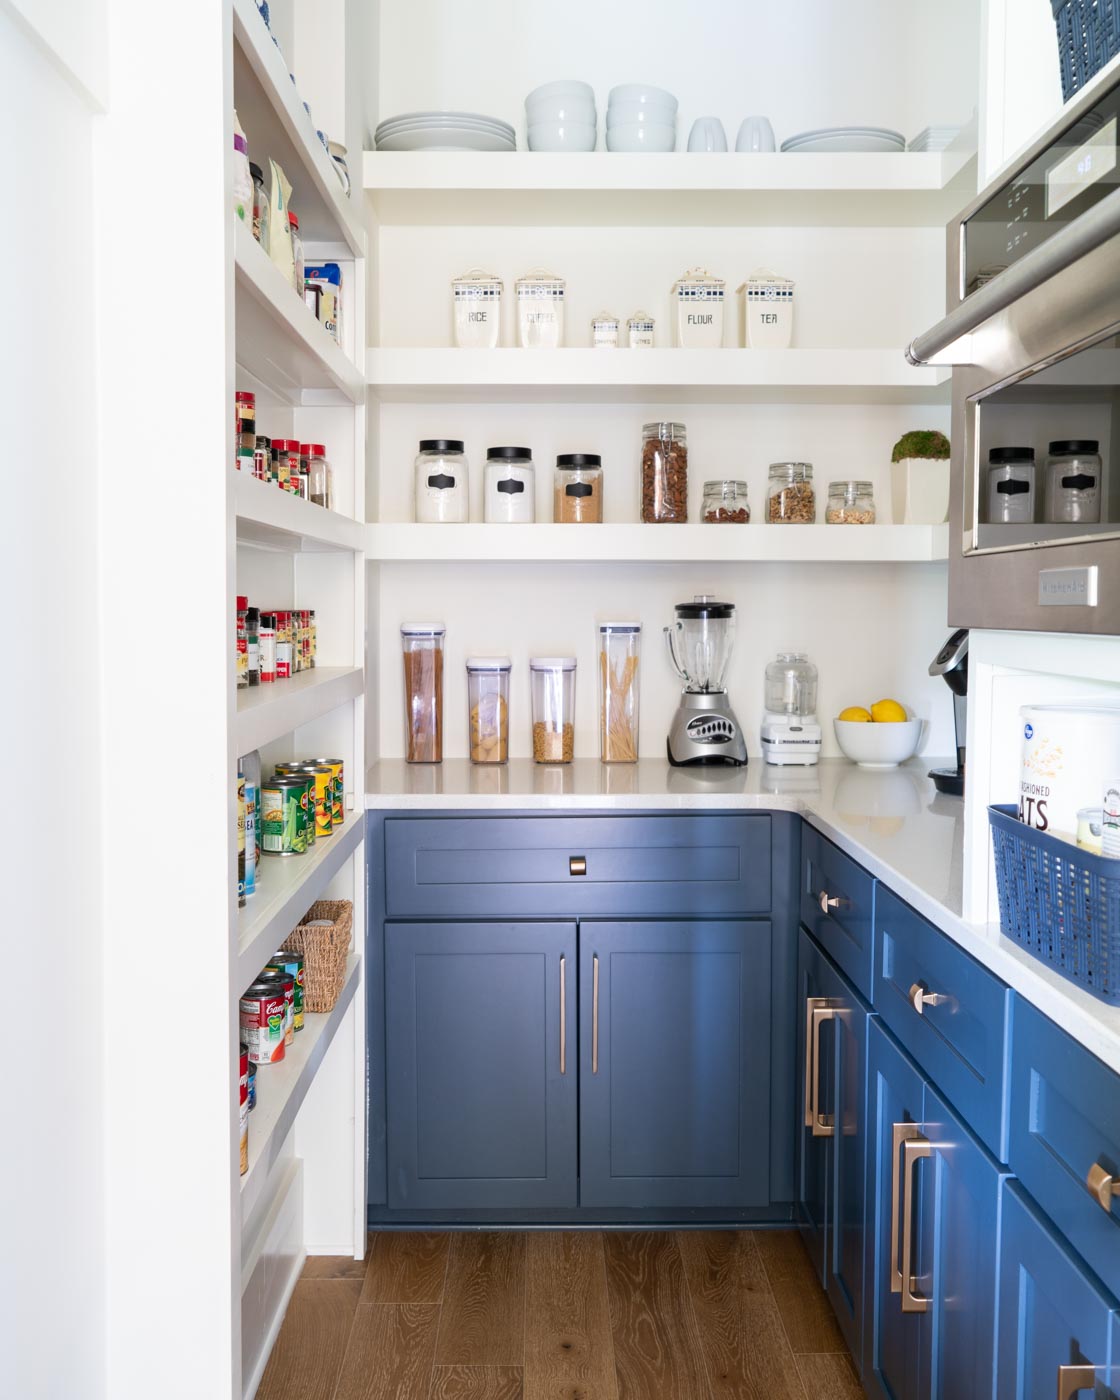 An organized kitchen pantry with white shelves and navy blue cabinets